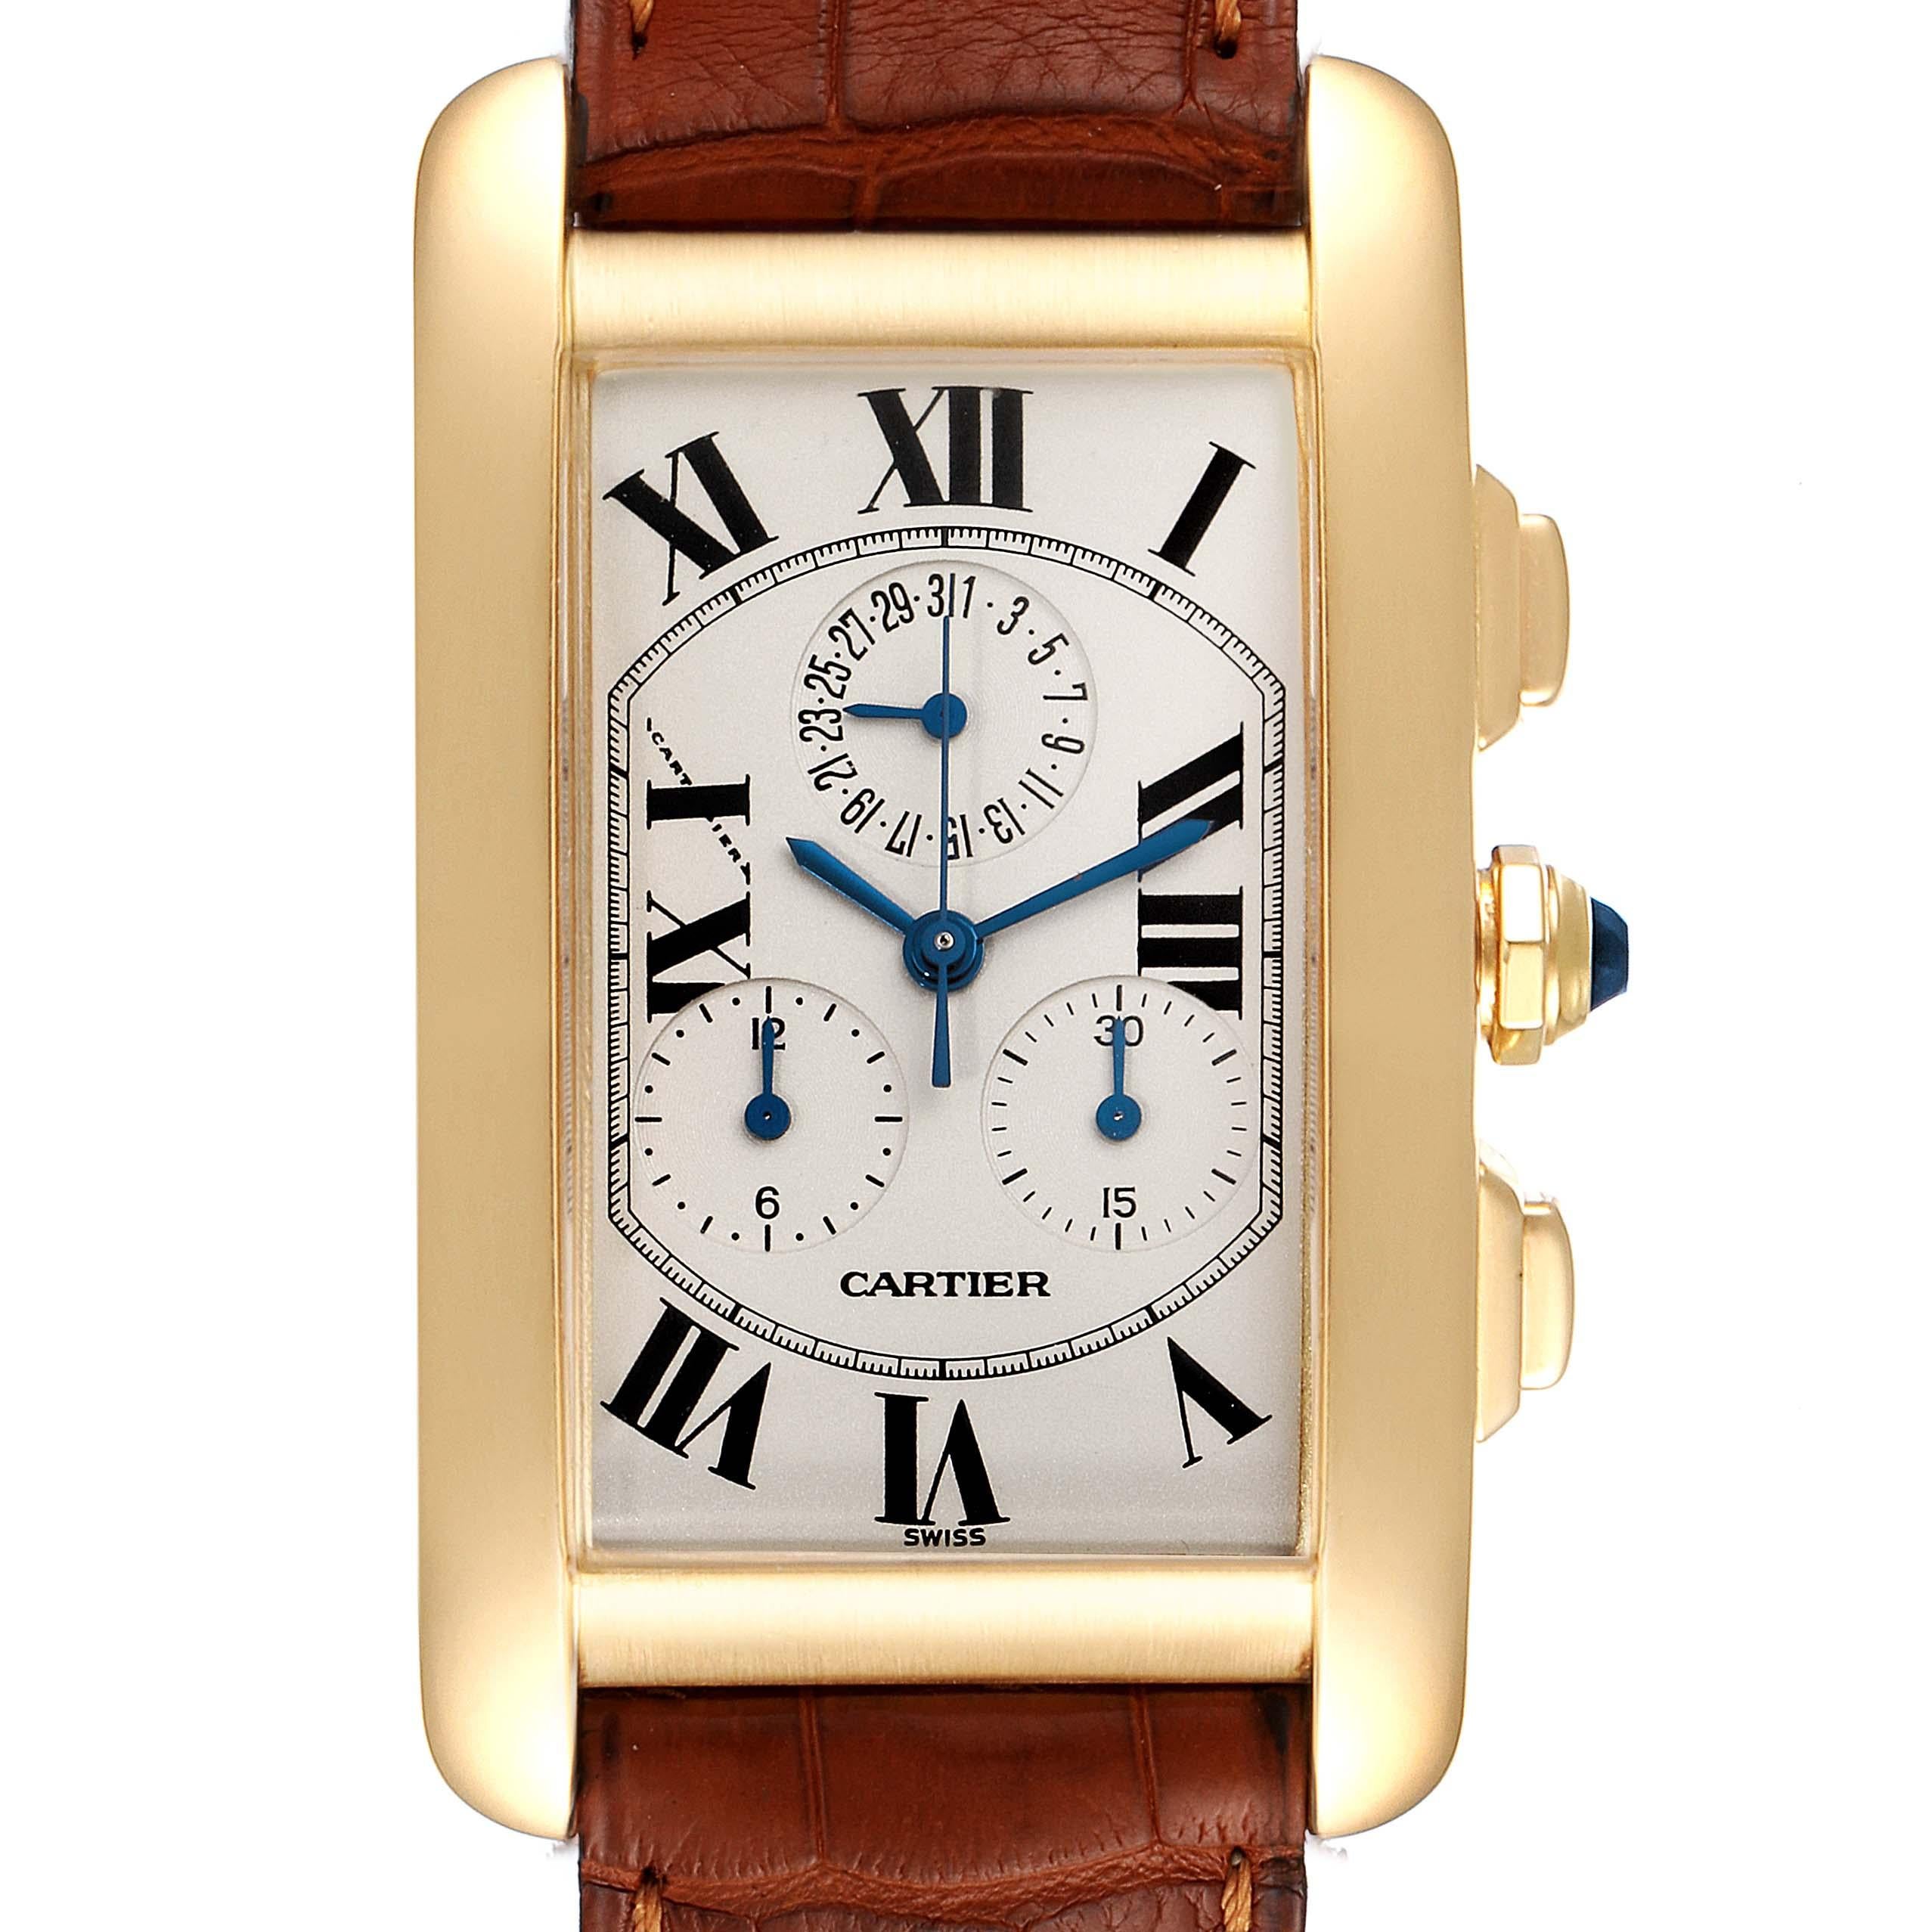 Cartier Tank Americaine Chronograph Yellow Gold Mens Watch W2601156. Quartz movement. Rectangular 18K yellow gold 36.0 x 27.0 mm case. Octagonal crown set with a blue sapphire cabochon. . Scratch resistant sapphire crystal. Silvered grained dial